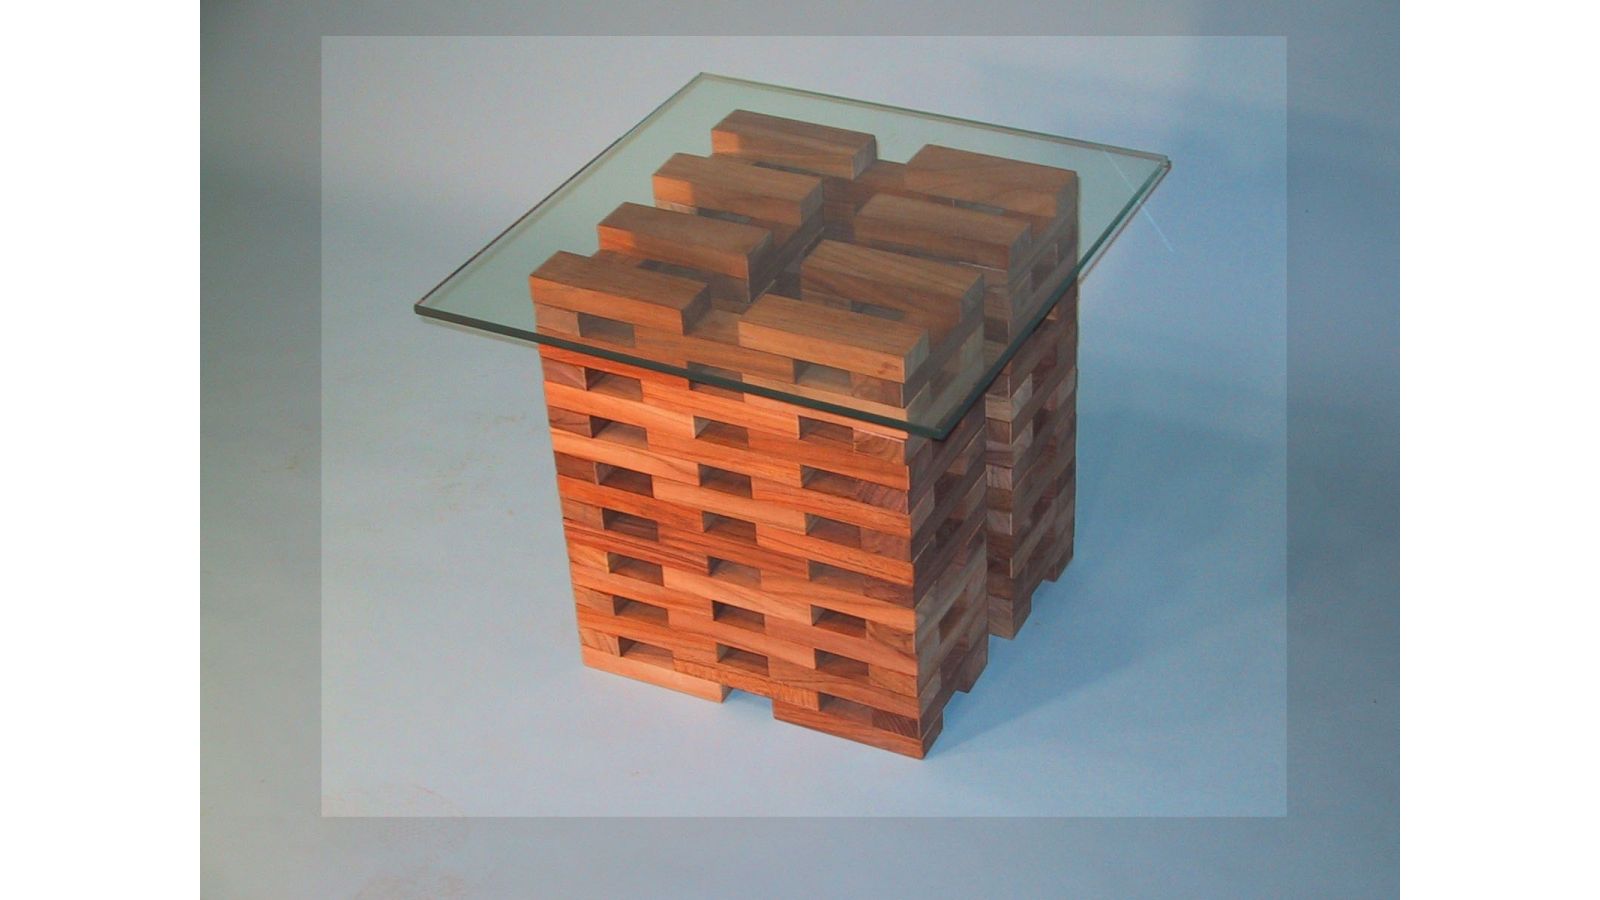 Infinity Teak Blocks come in any shape or size